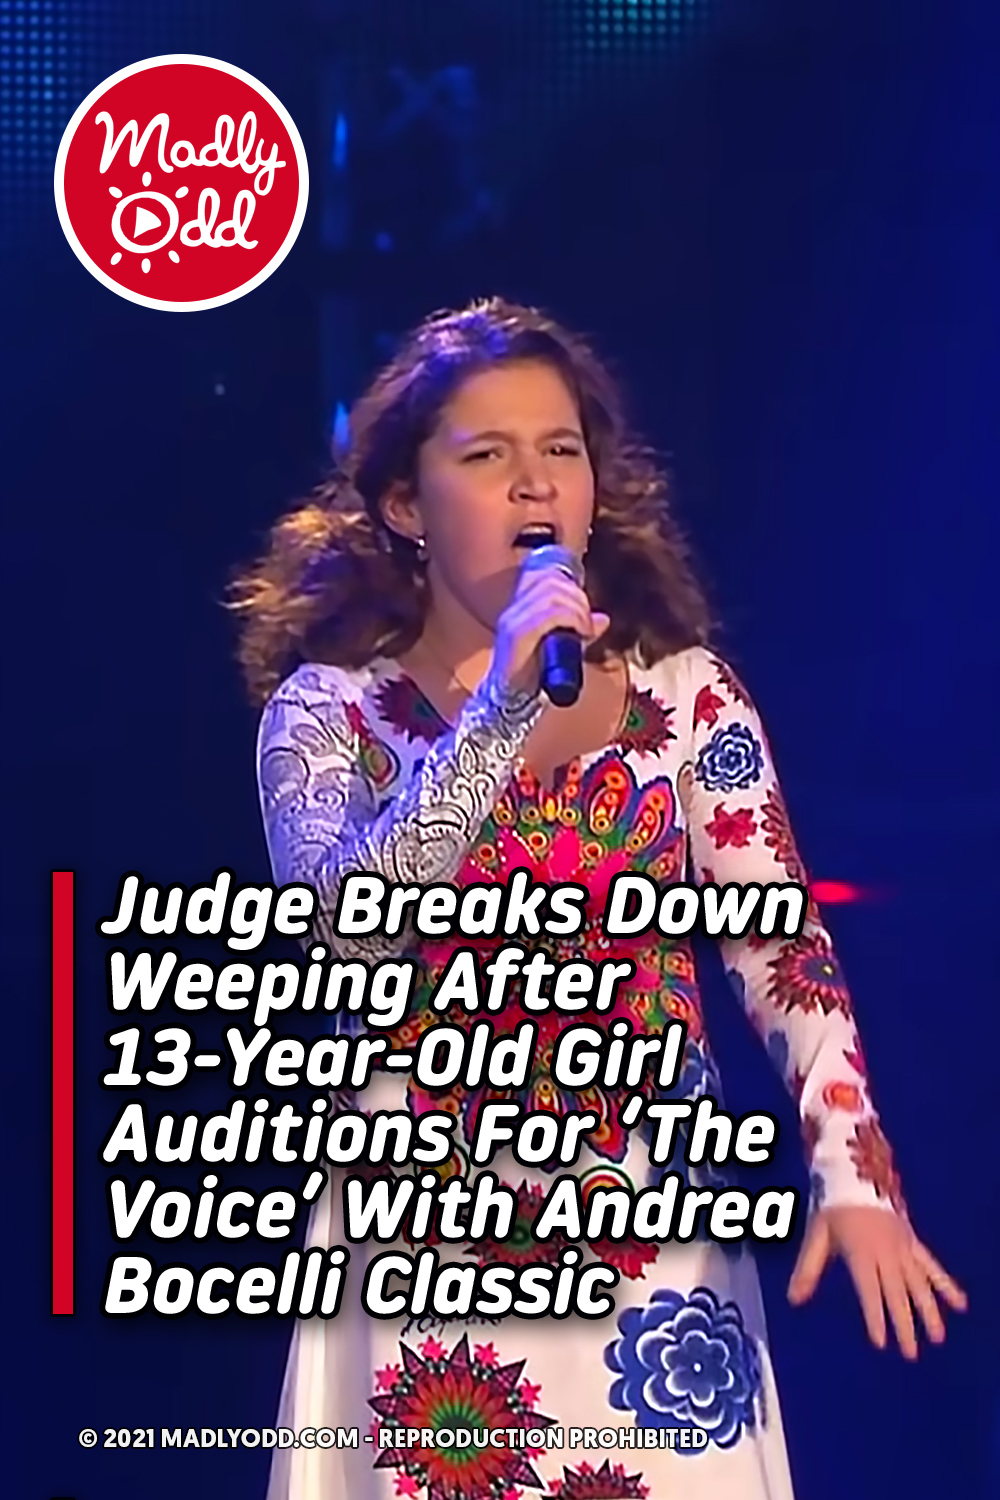 Judge Breaks Down Weeping After 13-Year-Old Girl Auditions For ‘The Voice’ With Andrea Bocelli Classic